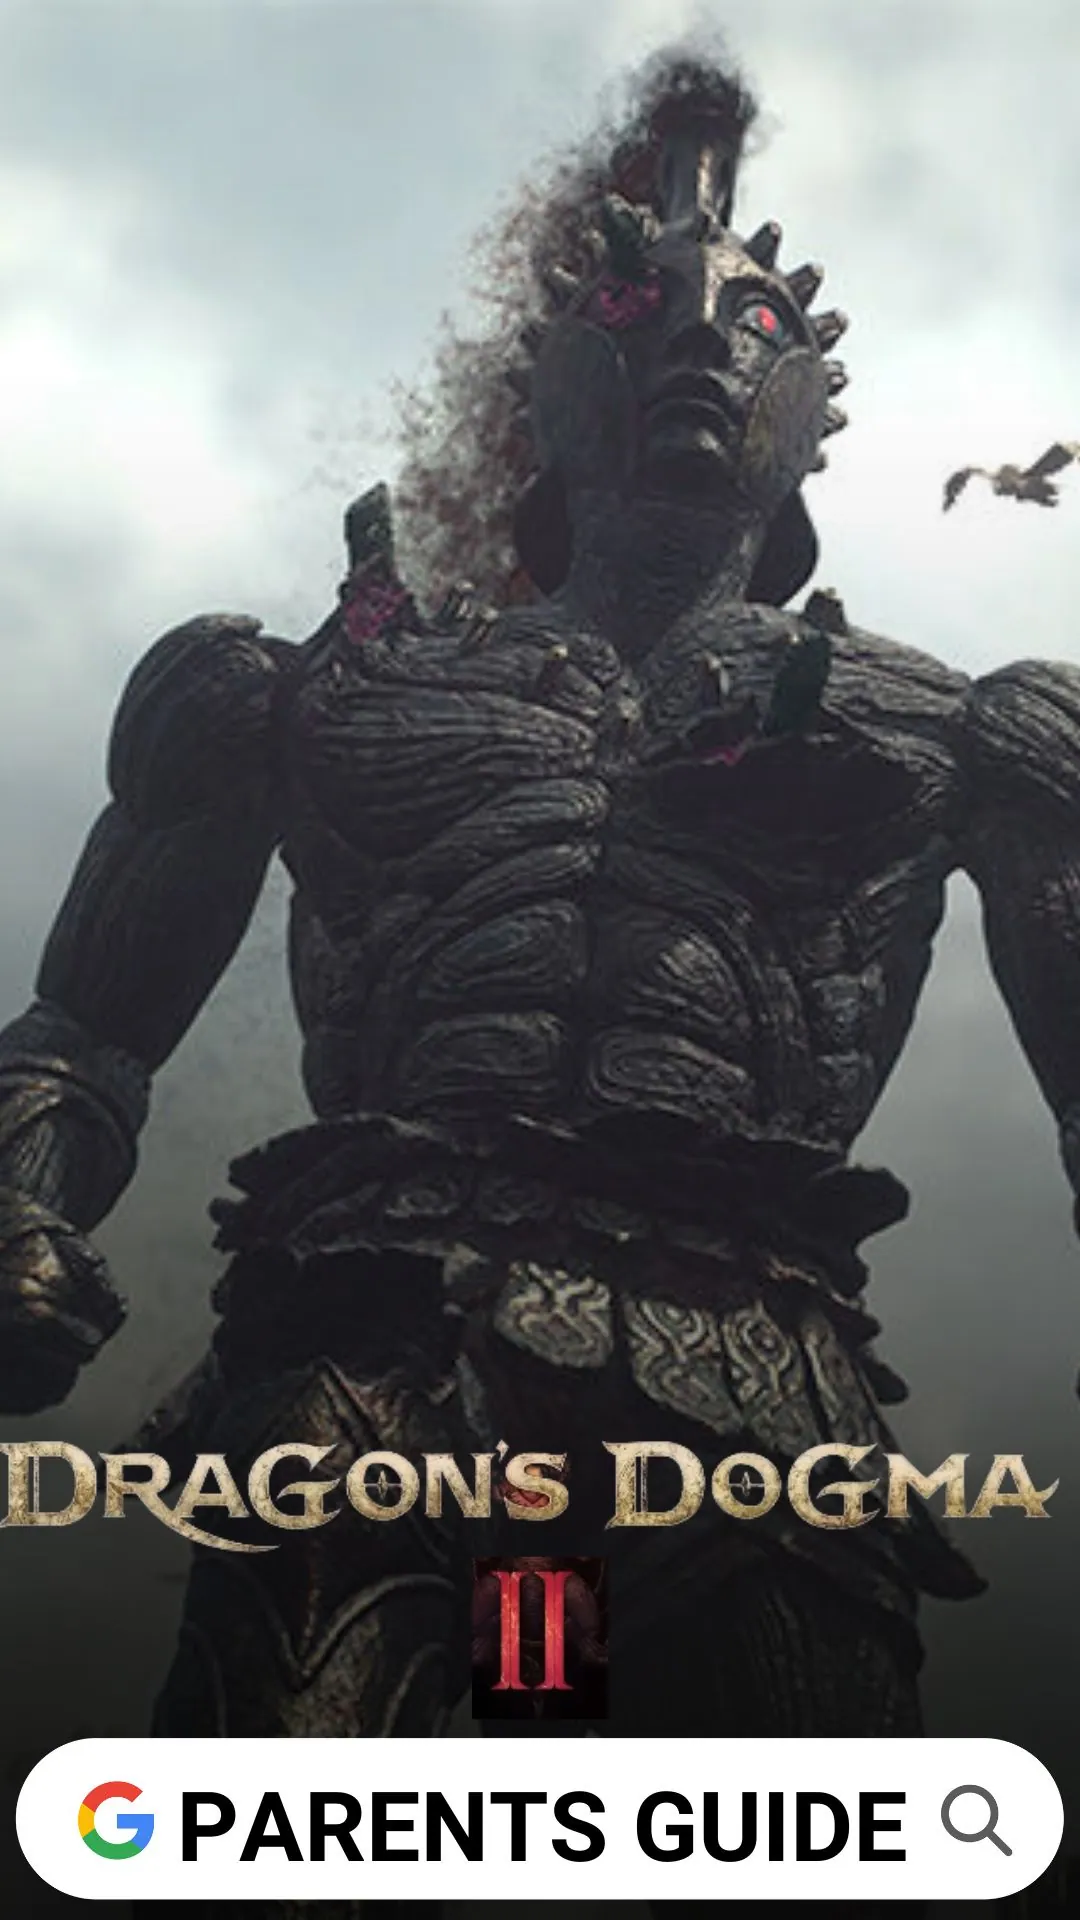 Dragon's Dogma II was recently rated on PEGI as 18+ and the website is  showing a release date for March 22nd, 2024. : r/DragonsDogma